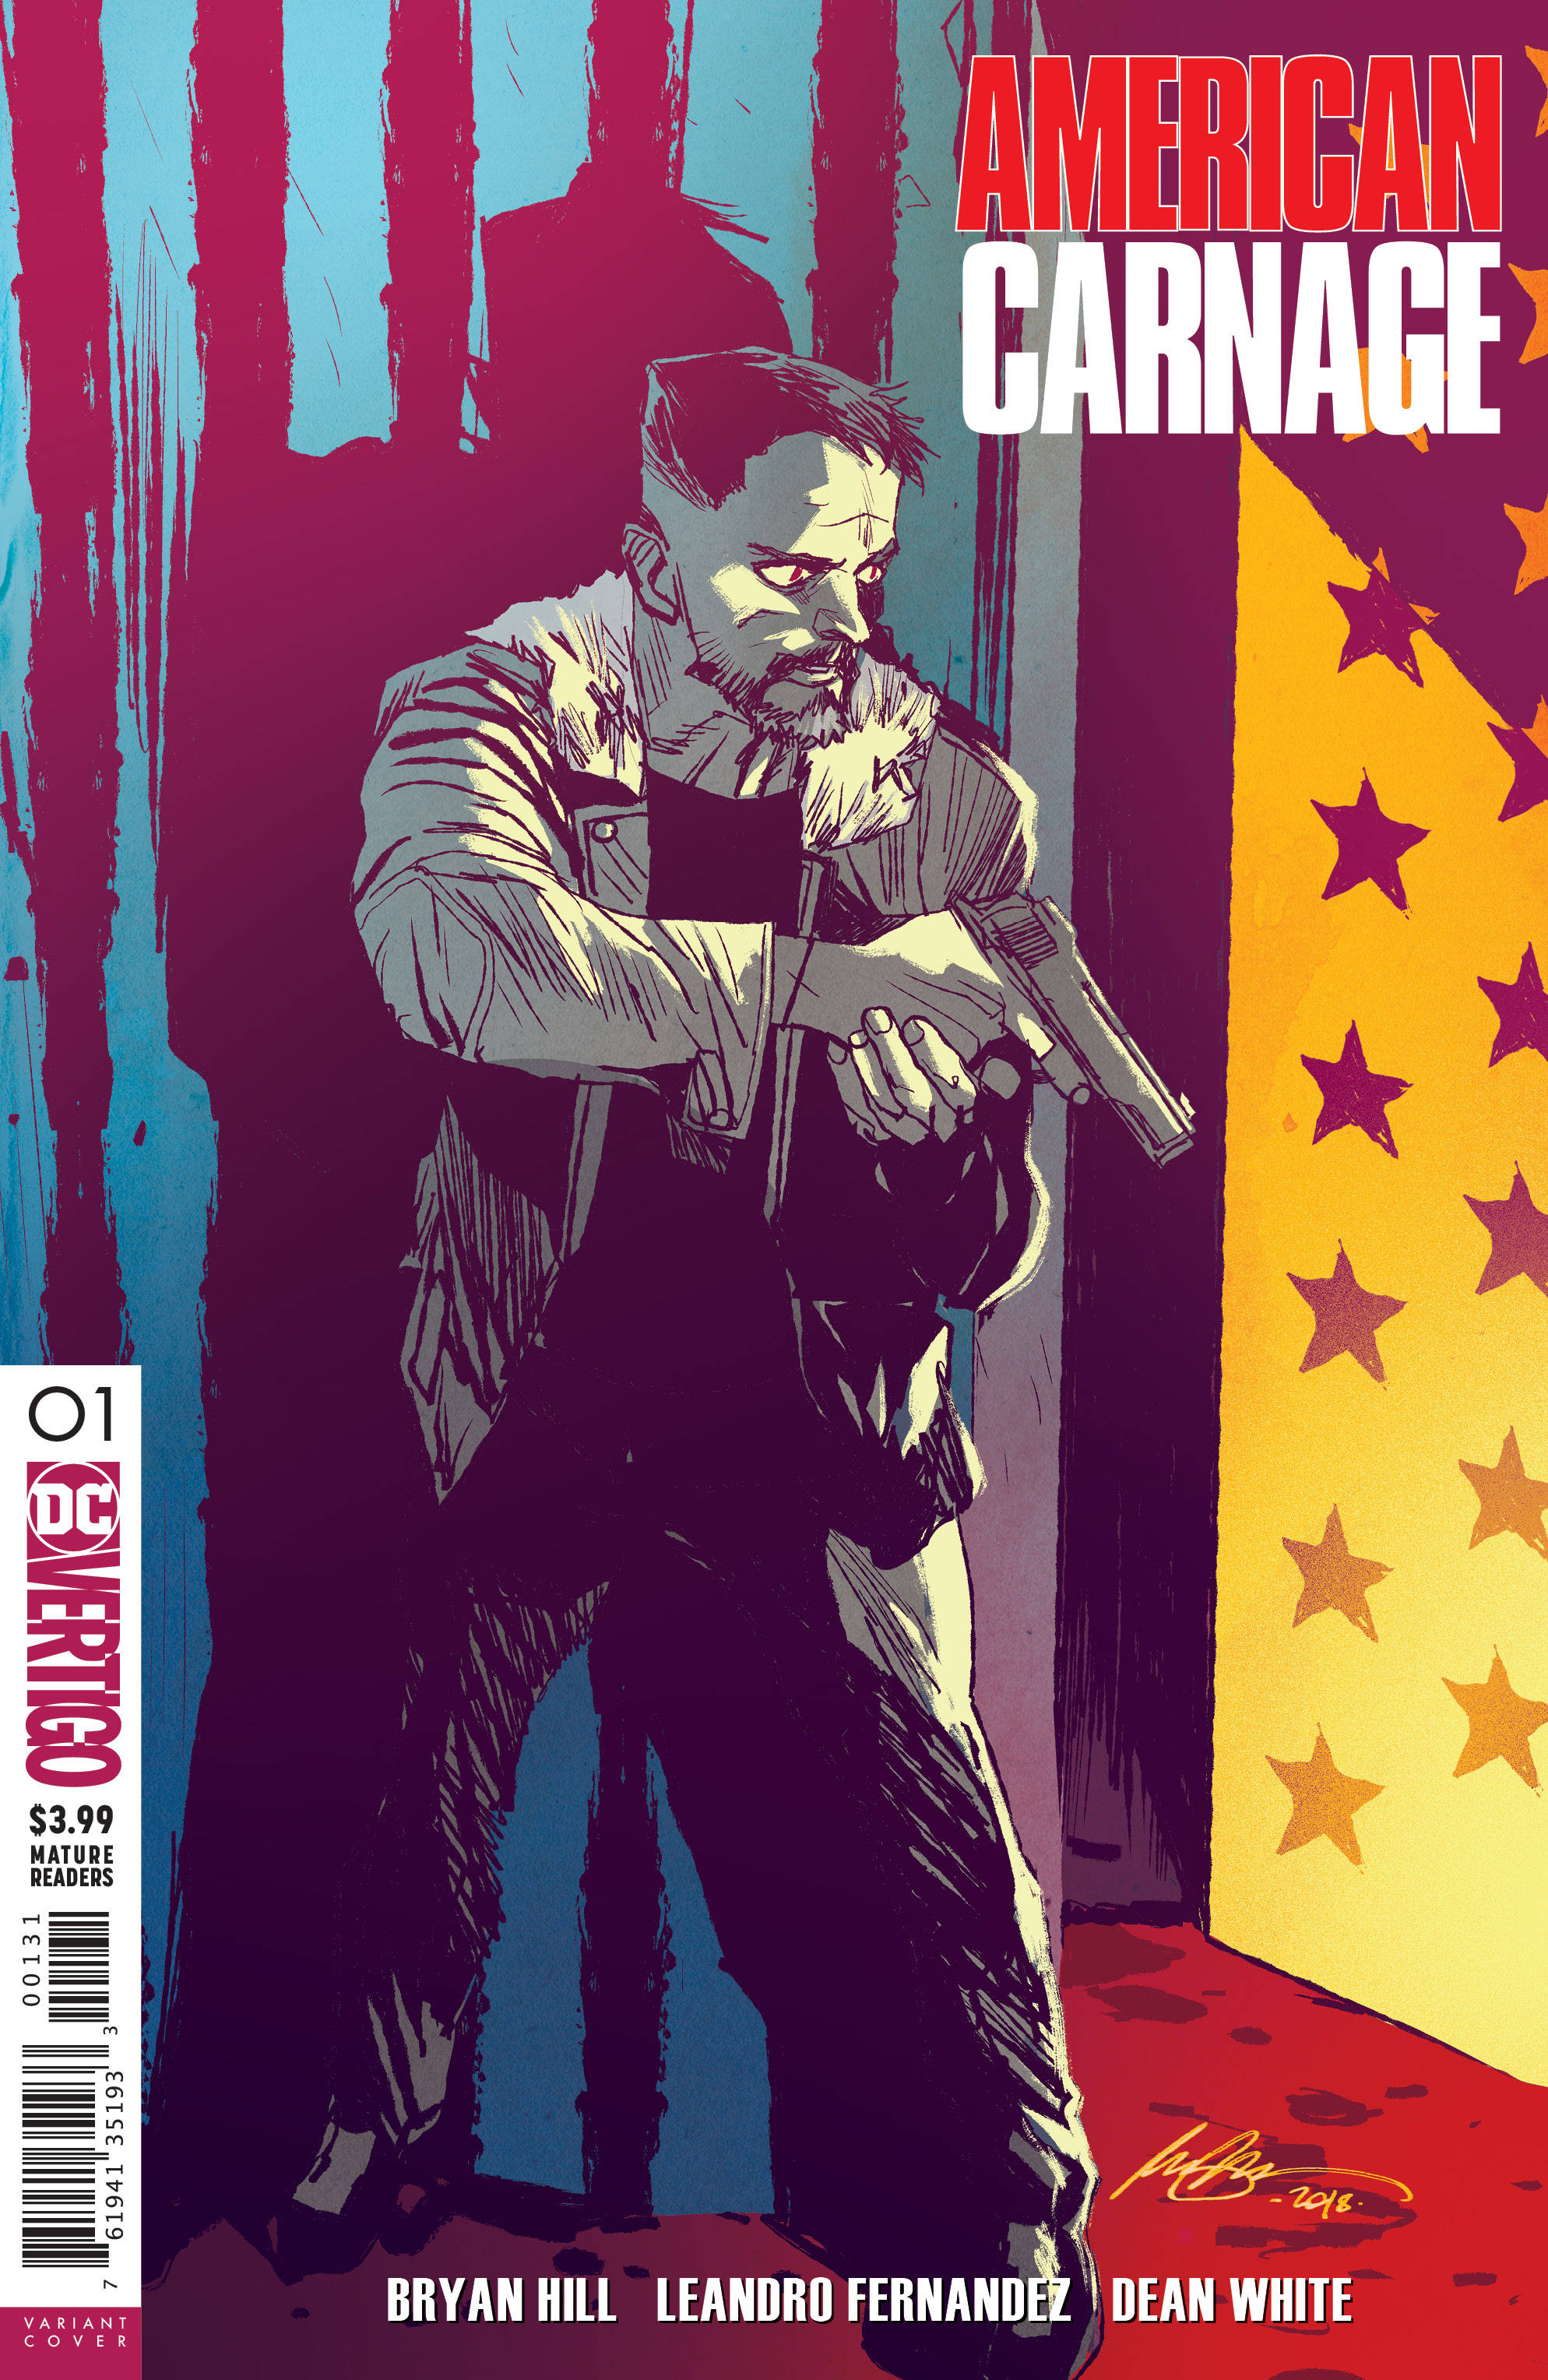 American Carnage #1 Variant Edition (Mature)